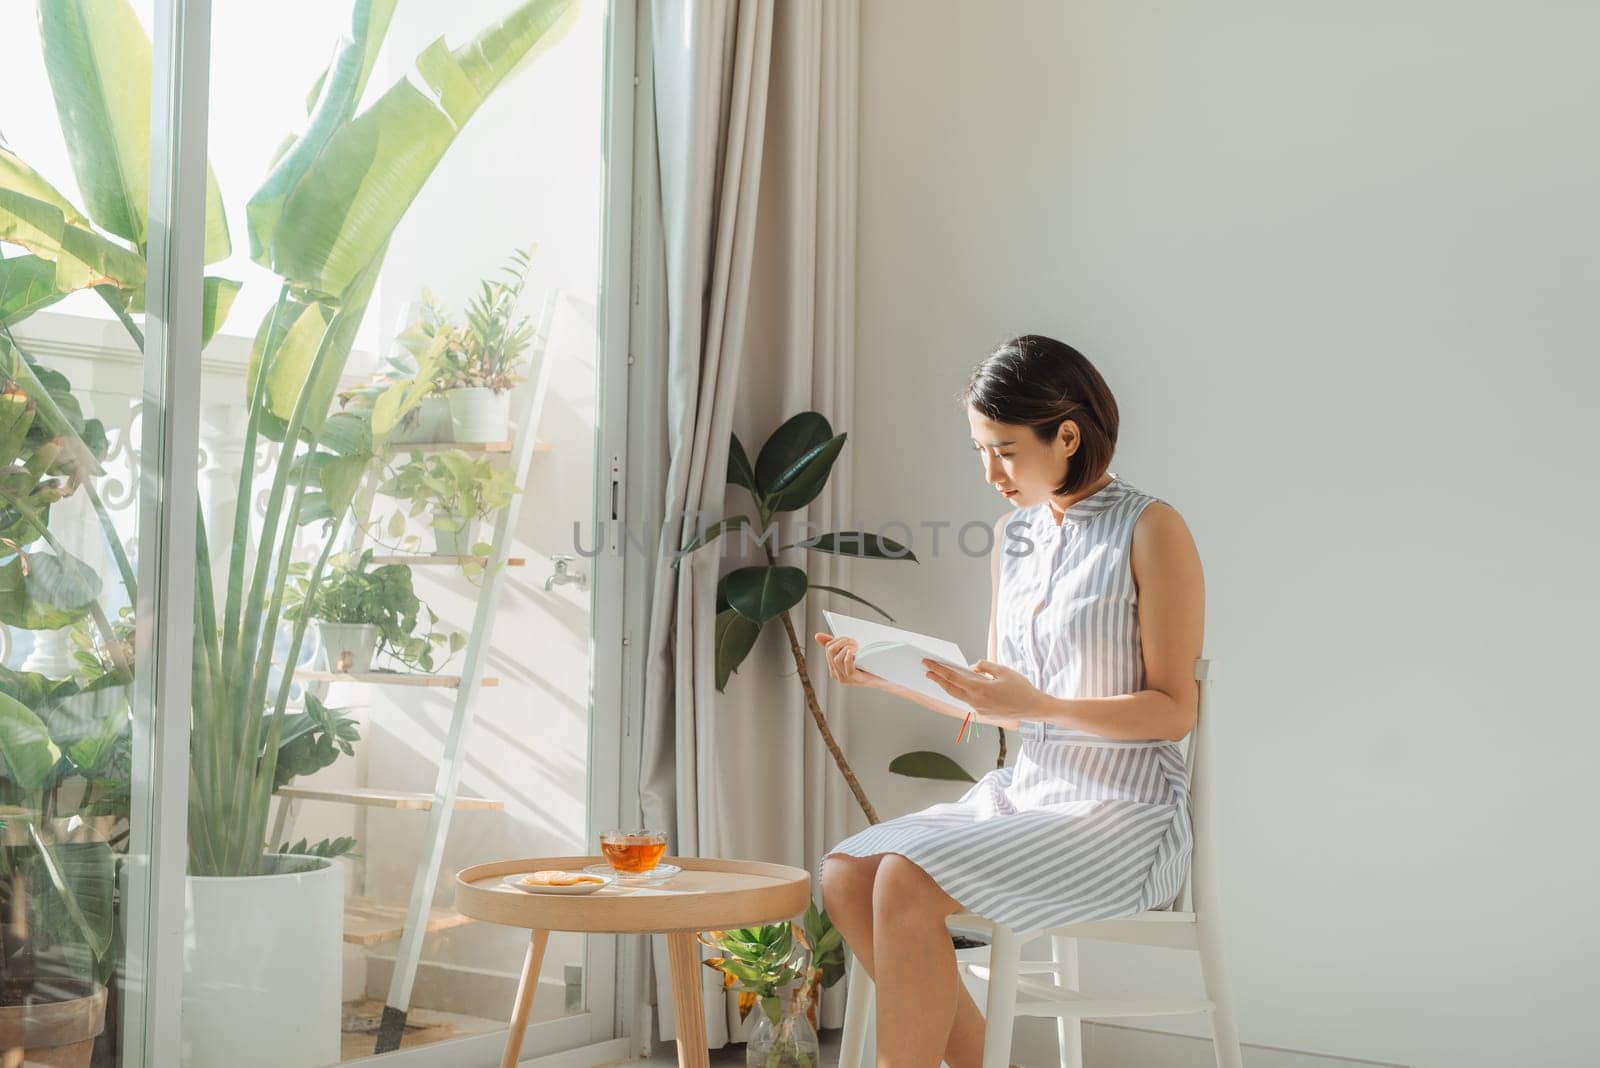 Young charming woman sitting on chair and reading book next to window at home.